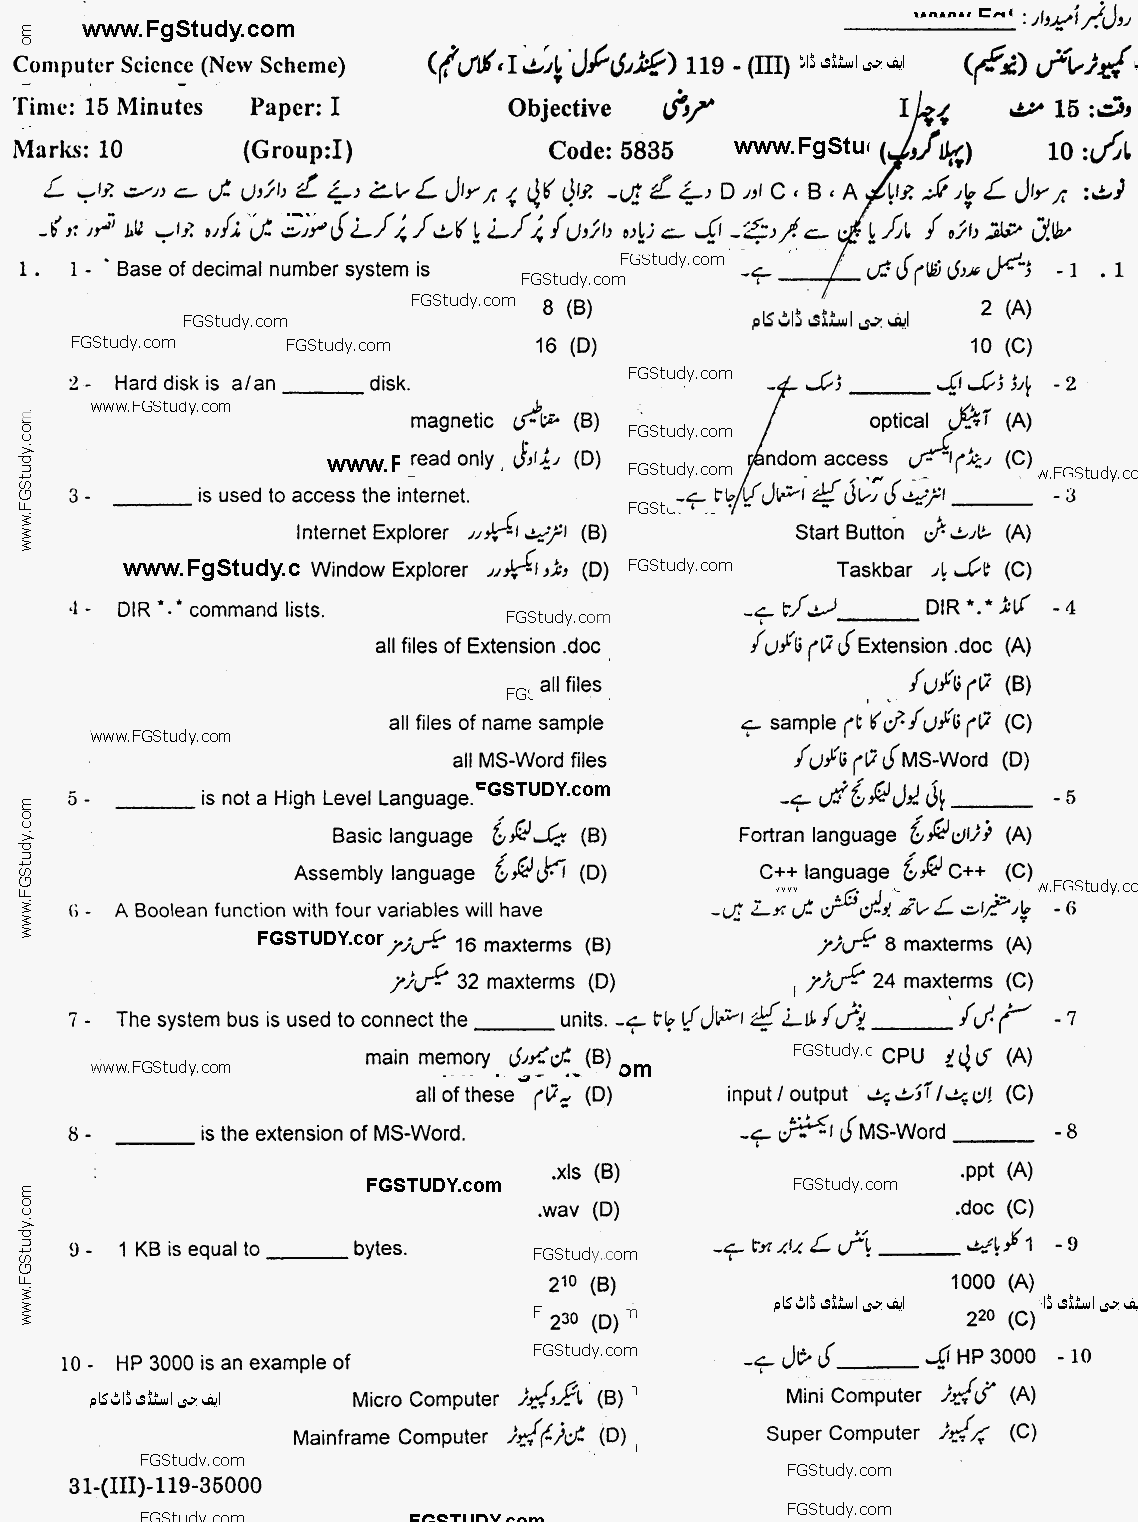 Gujranwala Board Computer Science Objective Group 1 9th Class Past Papers 2019